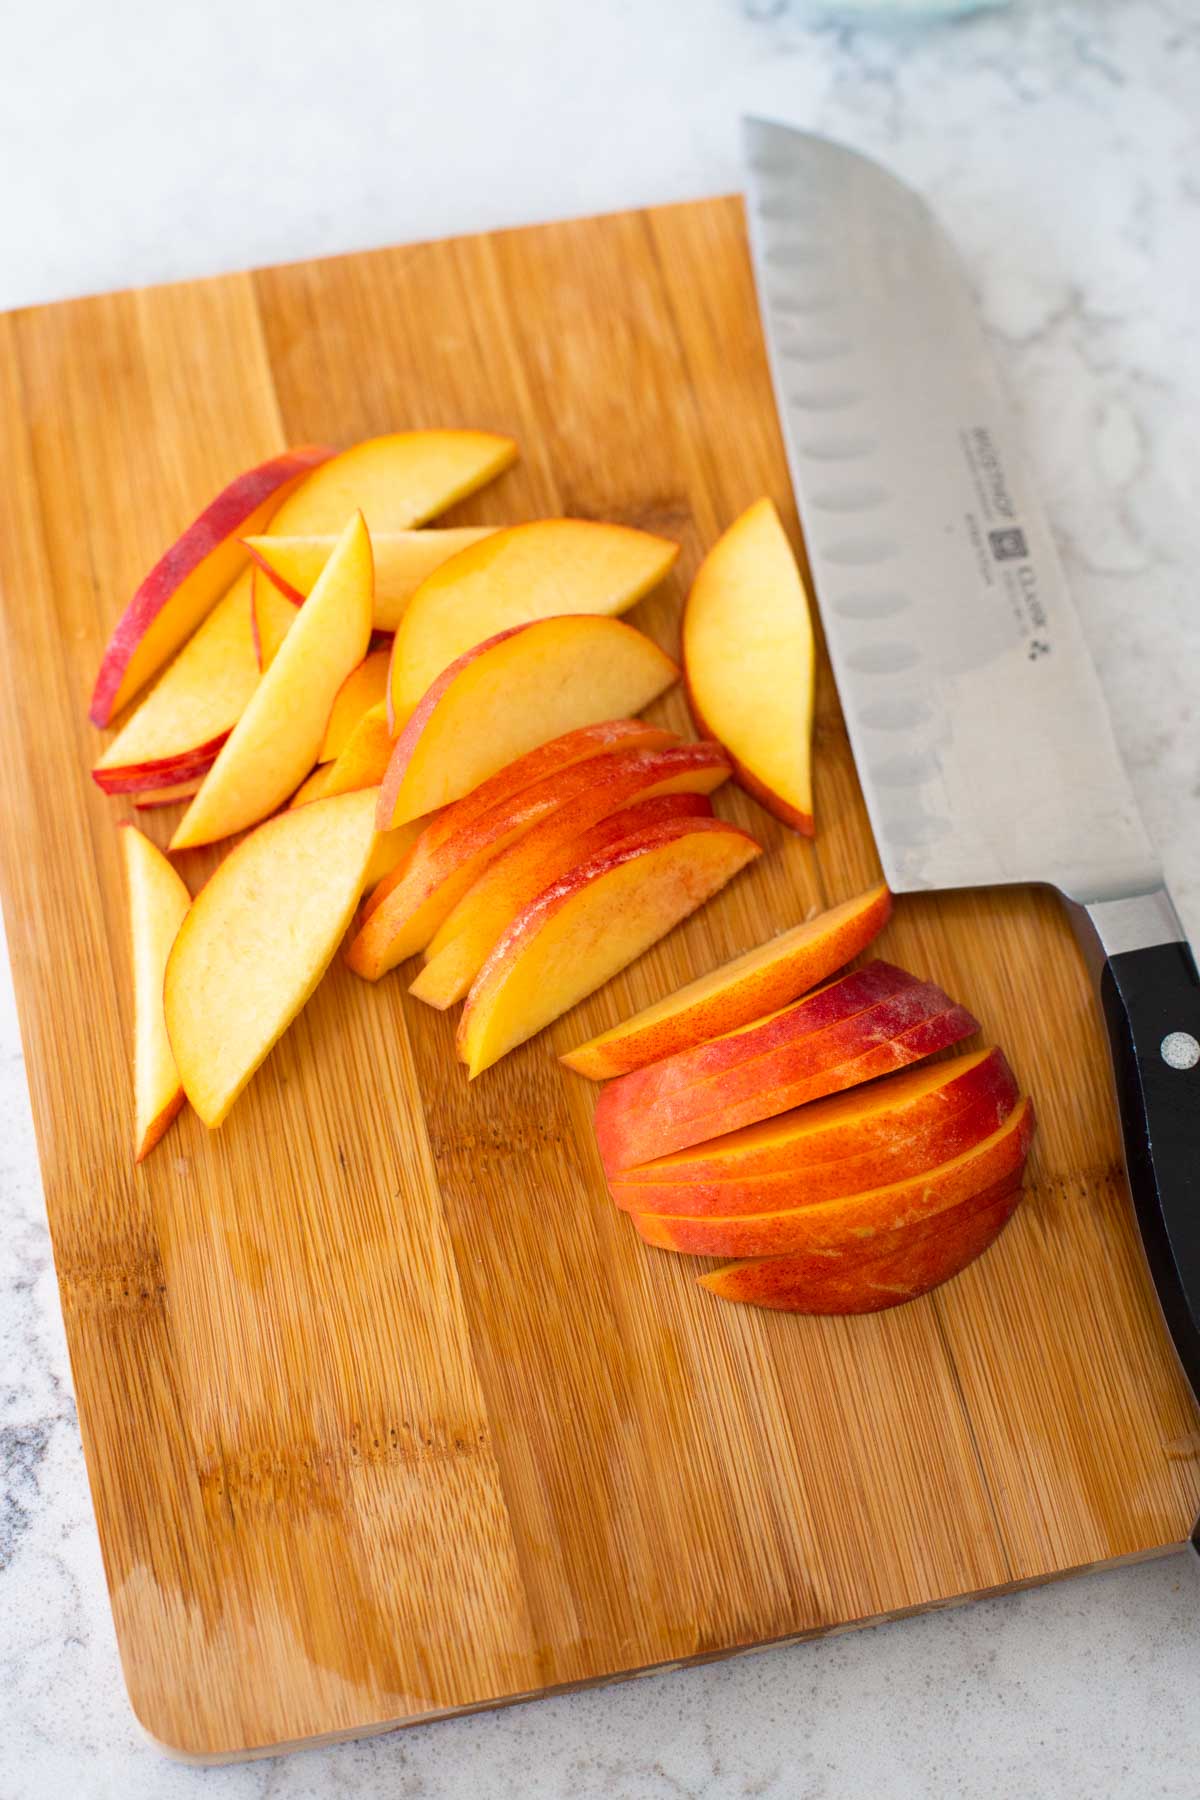 A fresh peach has been sliced into thin slices.